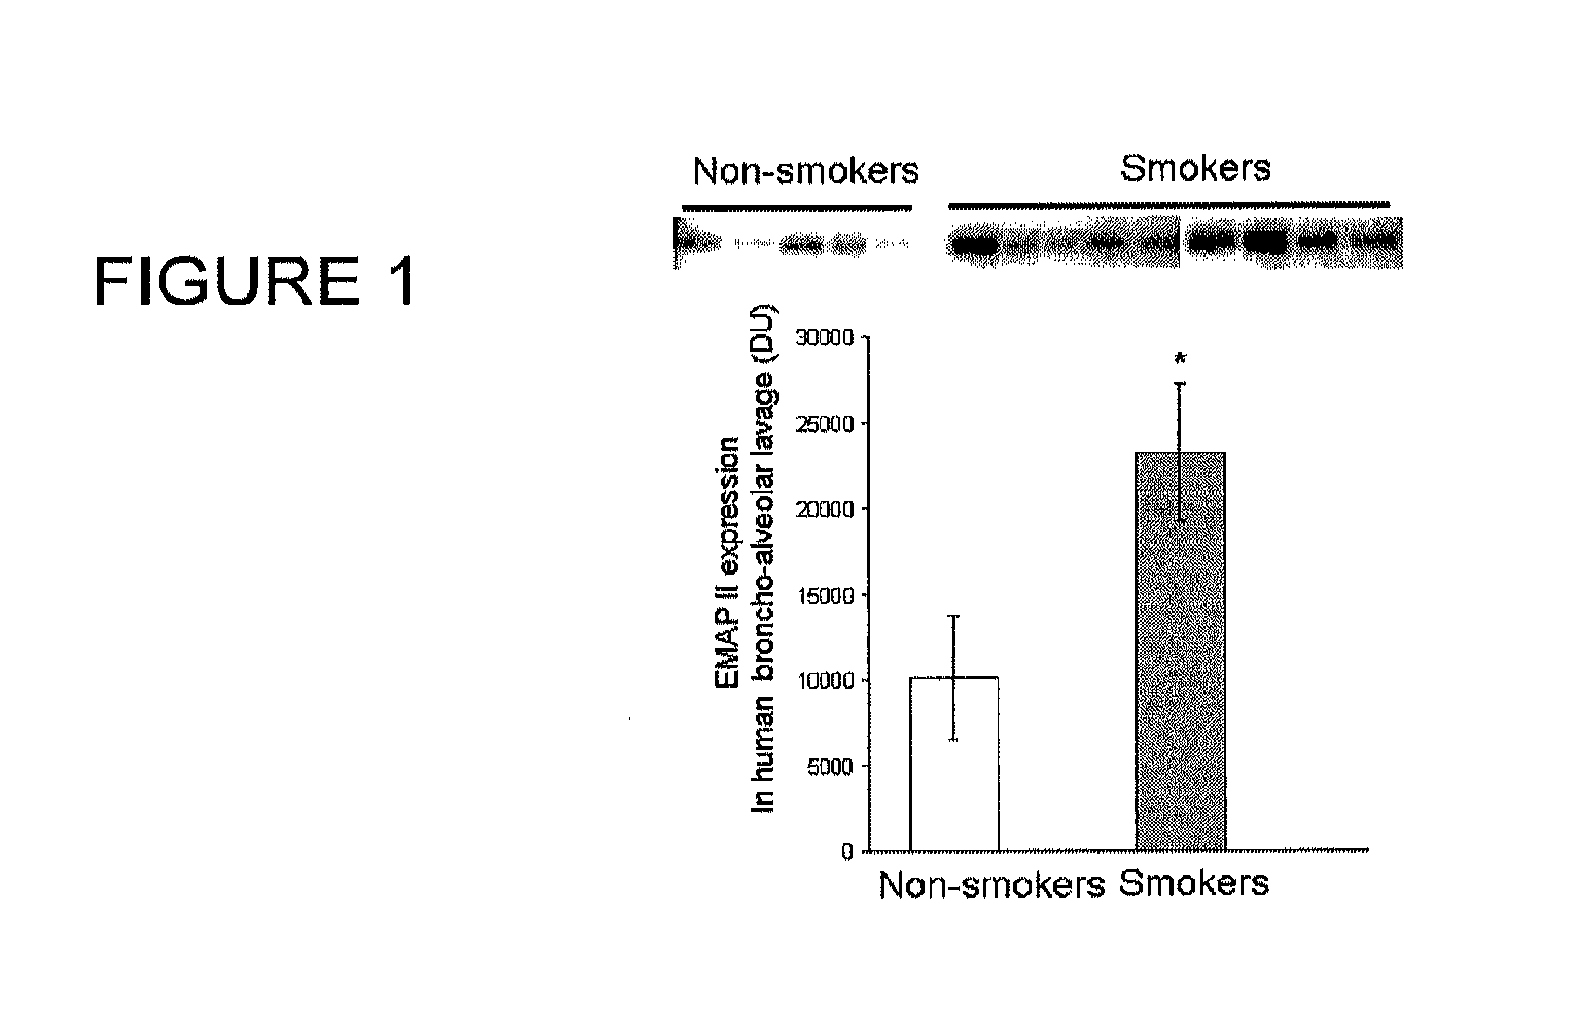 Method for diagnosing and treating emphysema